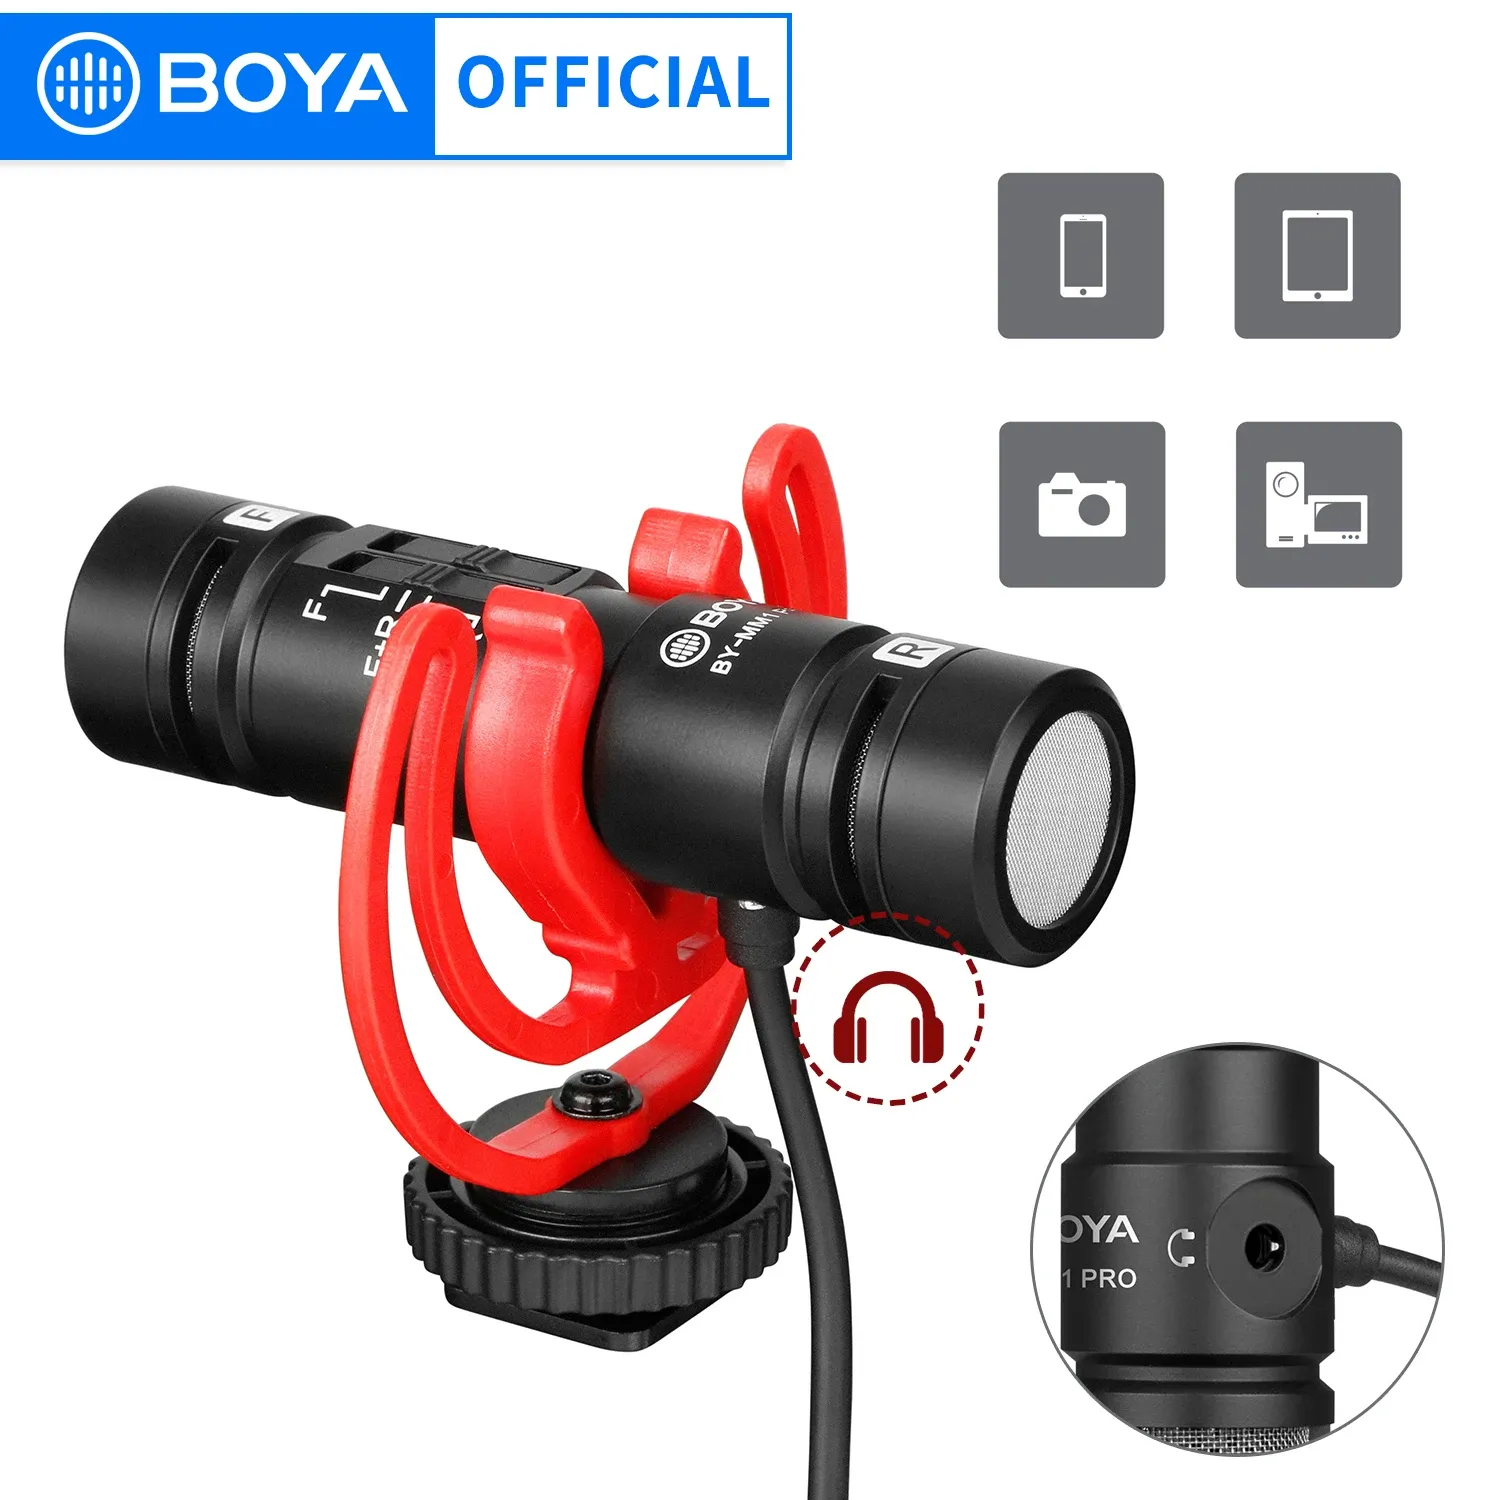 Parts Boya Bymm1 Pro Dualcapsule Condenser Shotgun Microphone Video Mic for Iphone Android Smartphone Camera Tablet Camcorder Pc